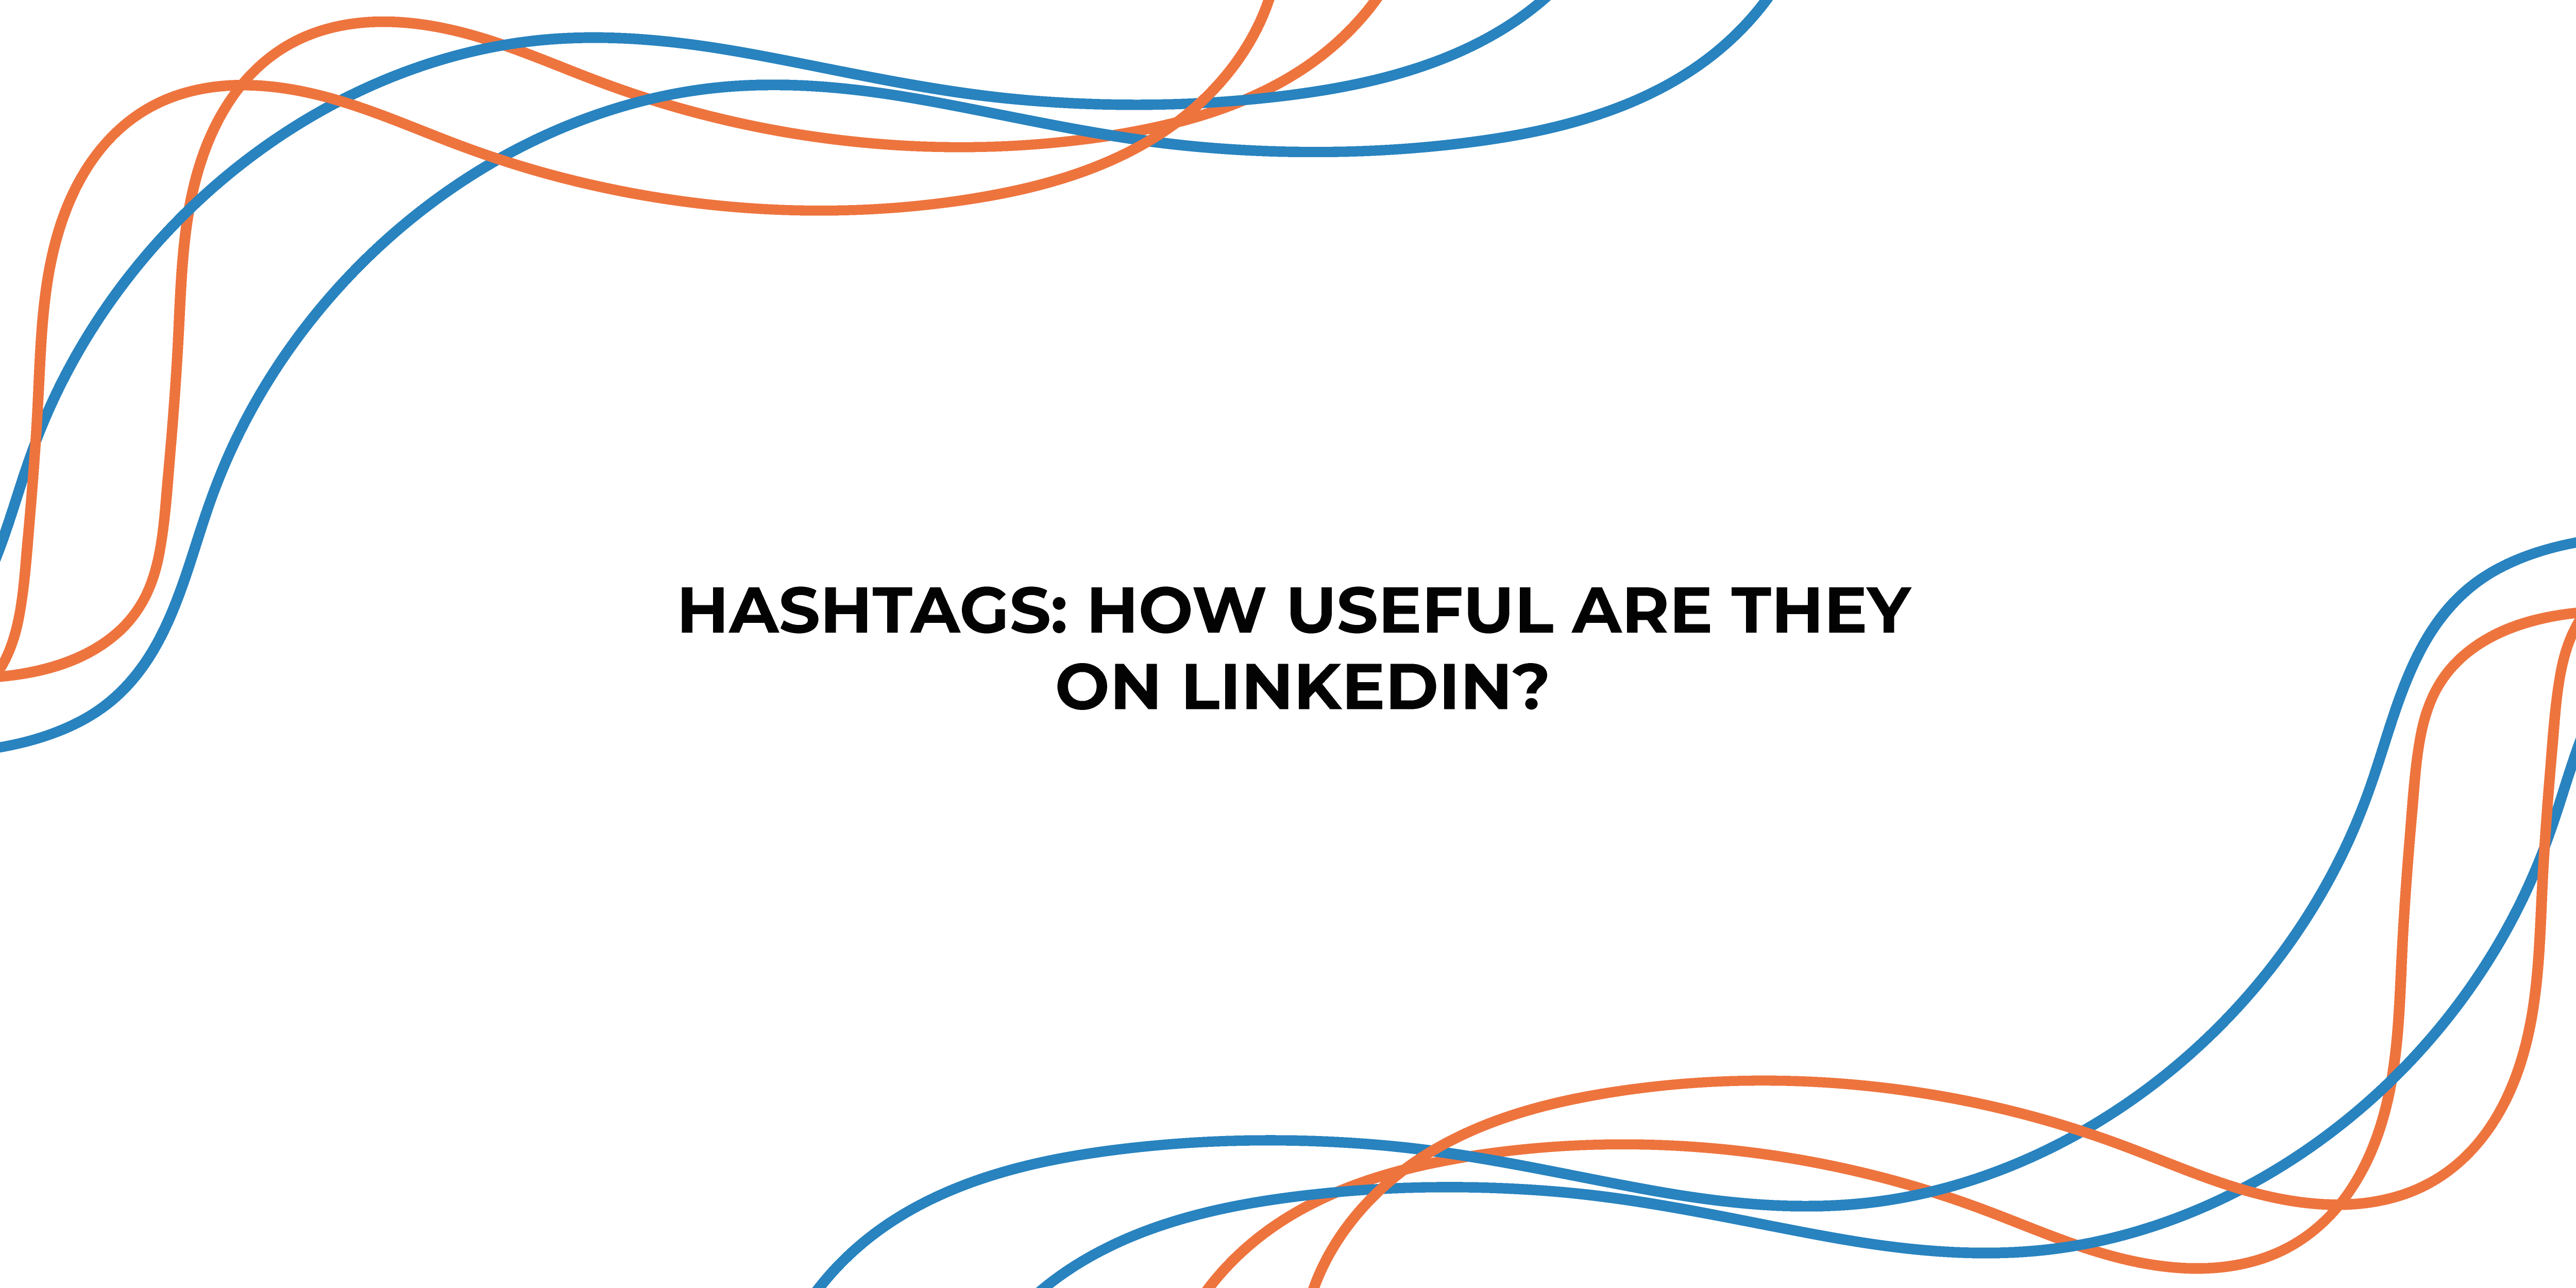 Hashtags: How Useful Are They On LinkedIn?